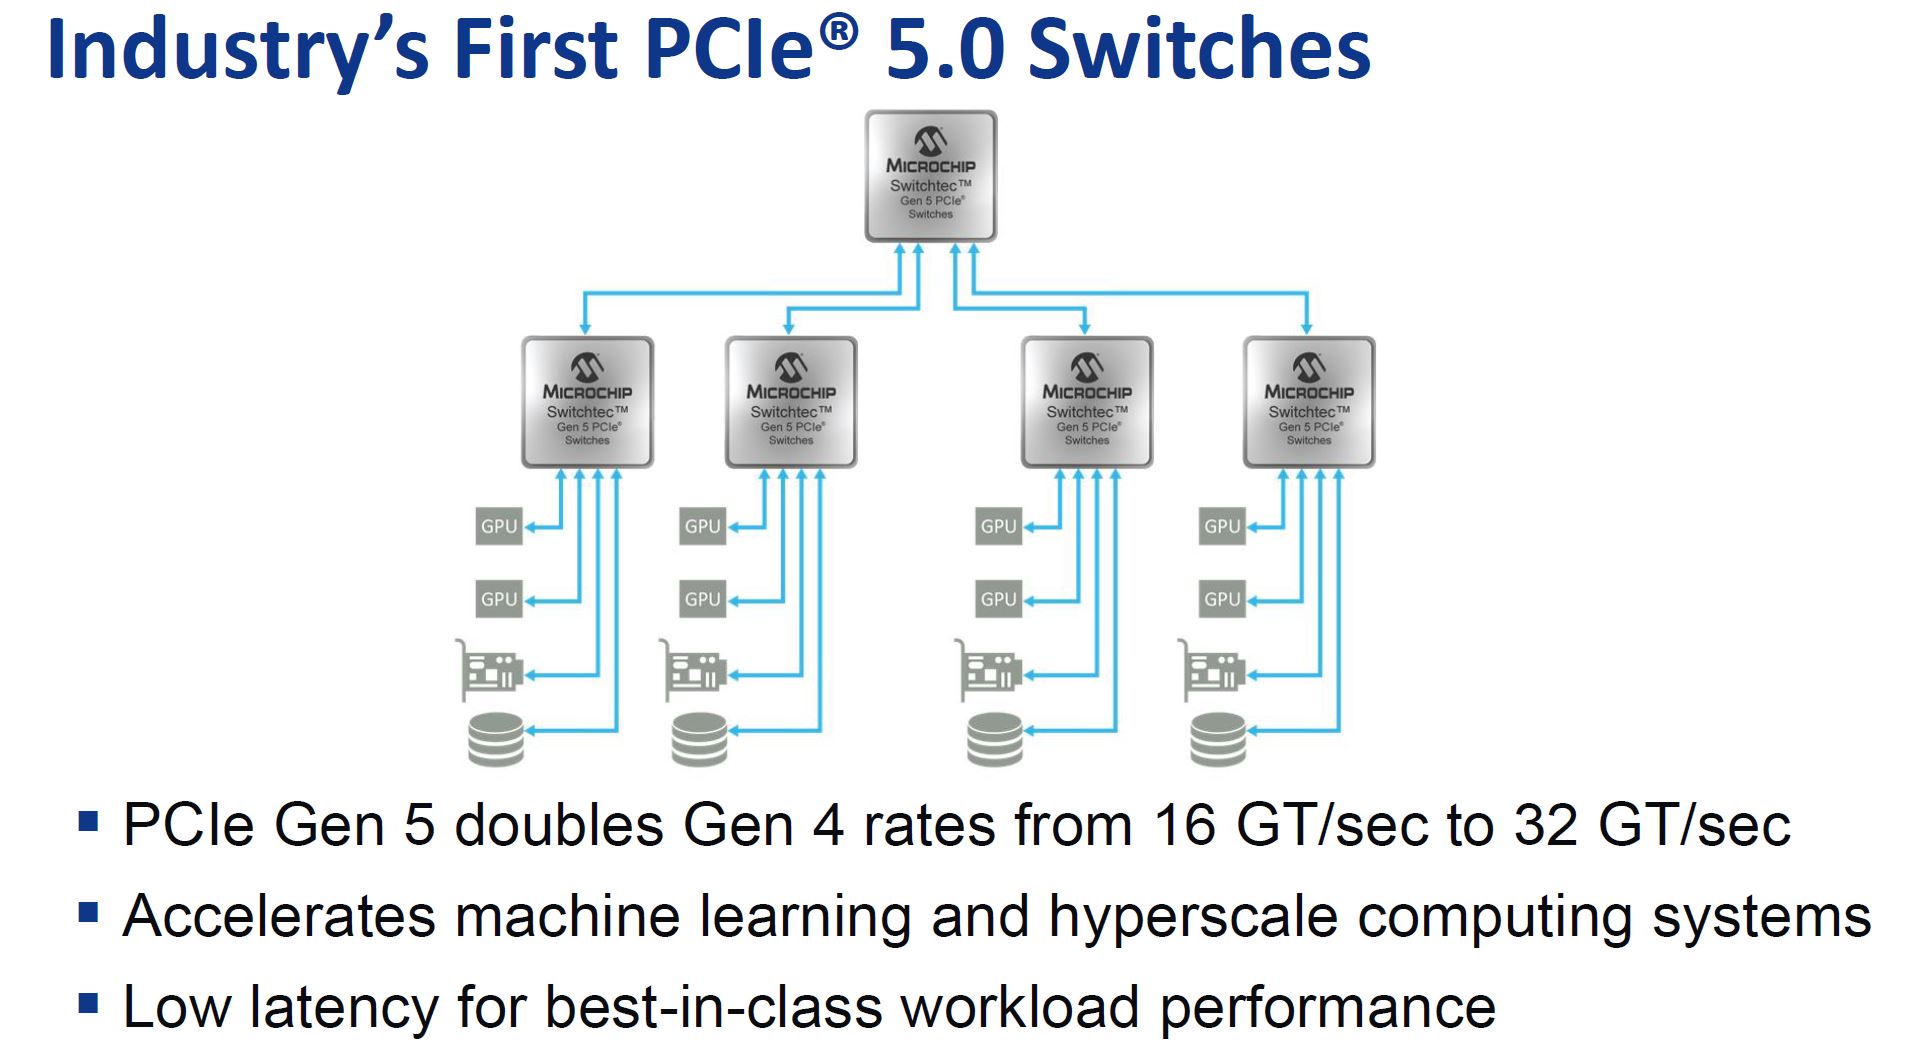 Microchip Switchtec PCIe 5.0 Switch Why